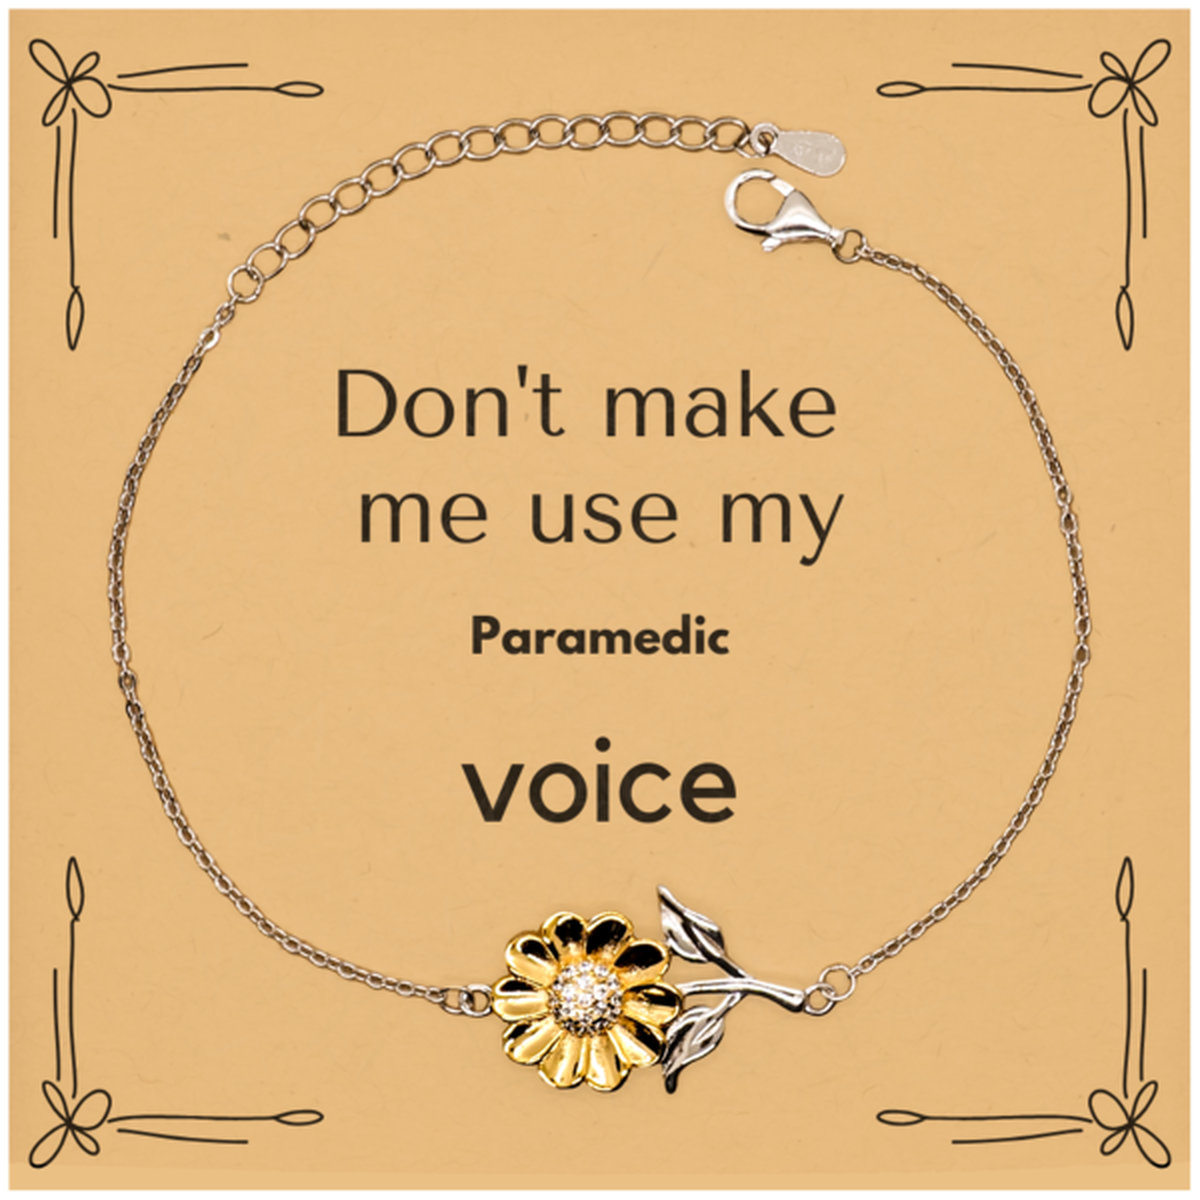 Don't make me use my Paramedic voice, Sarcasm Paramedic Card Gifts, Christmas Paramedic Sunflower Bracelet Birthday Unique Gifts For Paramedic Coworkers, Men, Women, Colleague, Friends